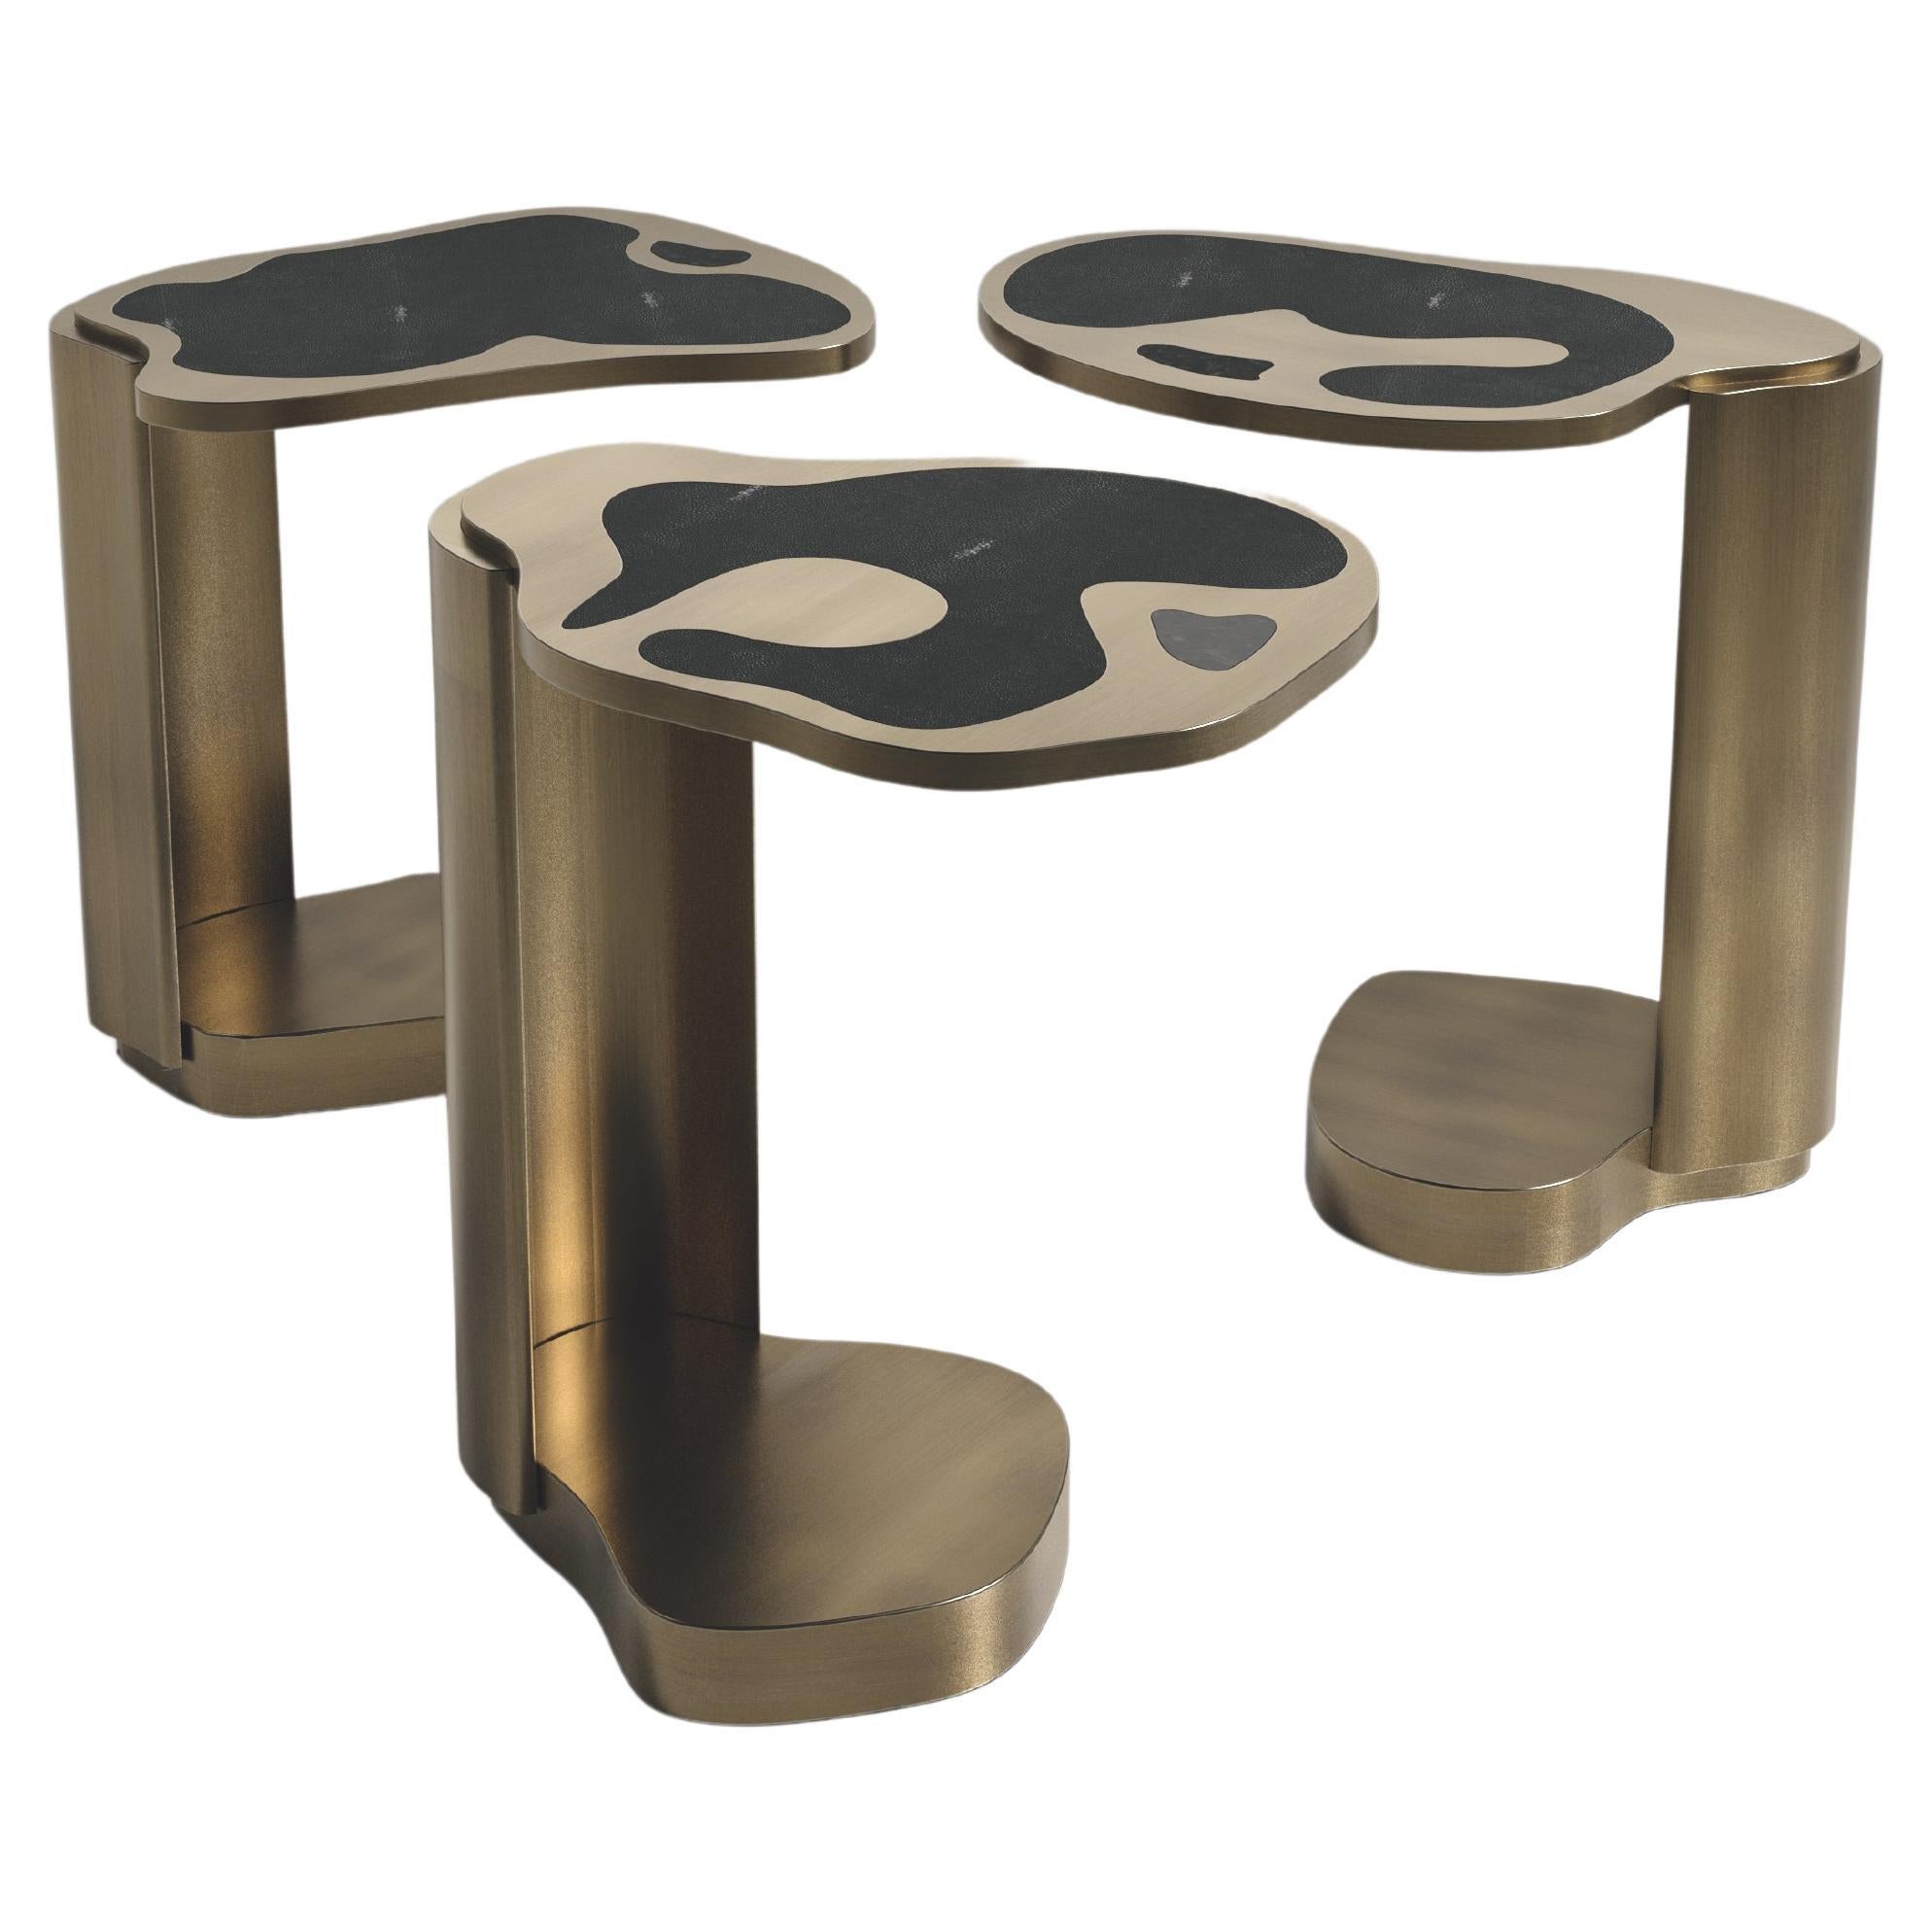 Shagreen Nesting Side Tables with Bronze Patina Brass Details by Kifu Paris